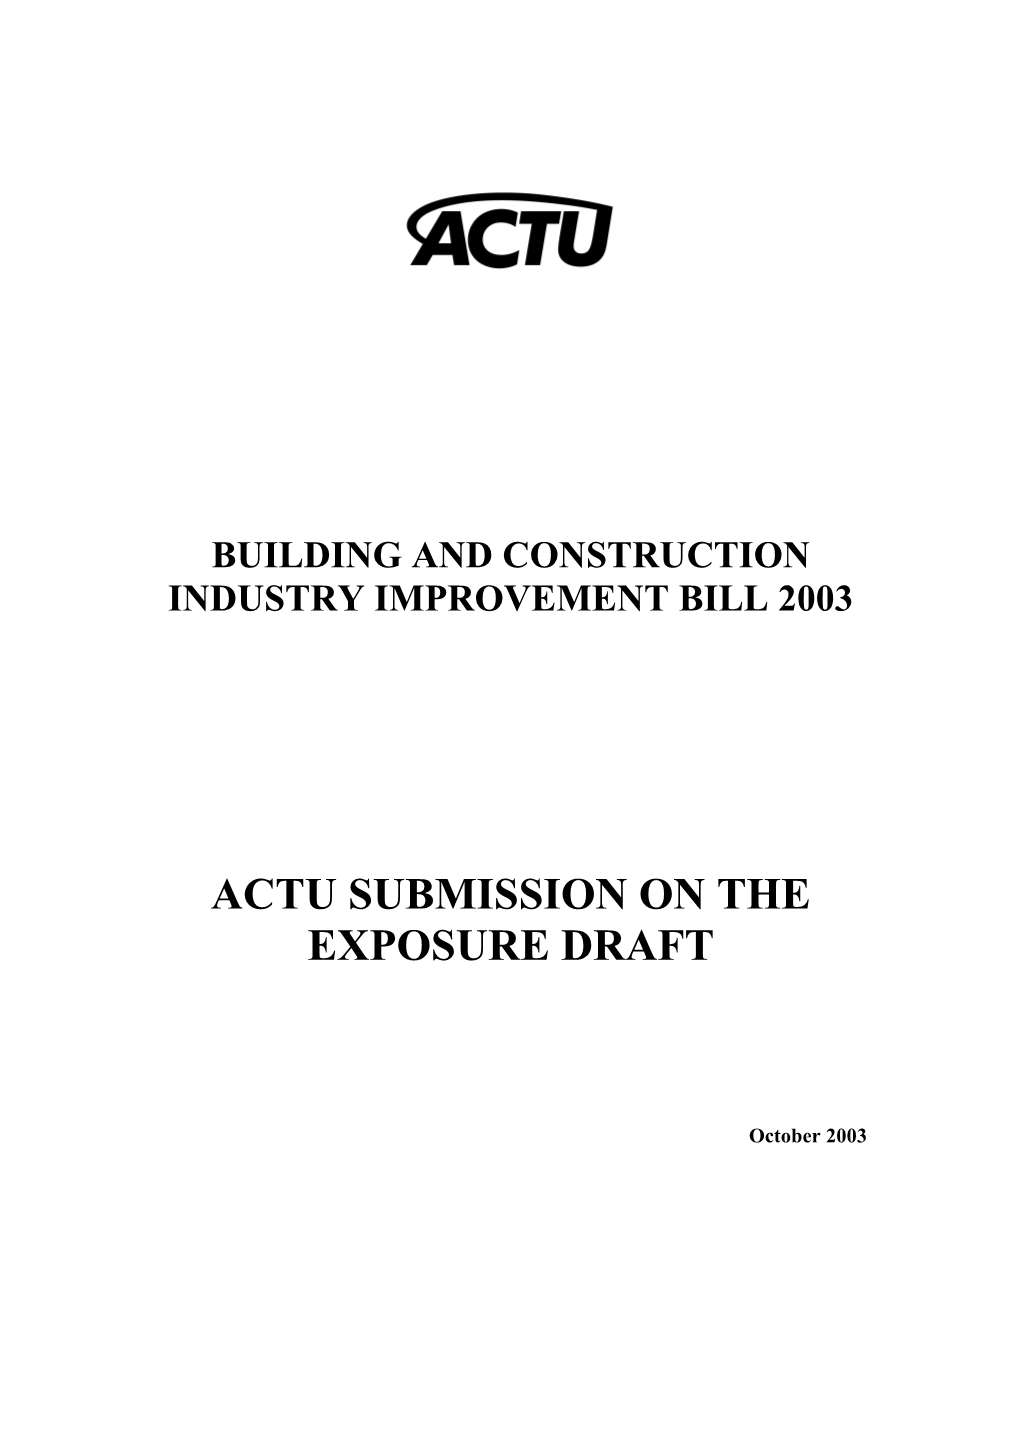 Building and Construction Industry Improvement Bill 2003